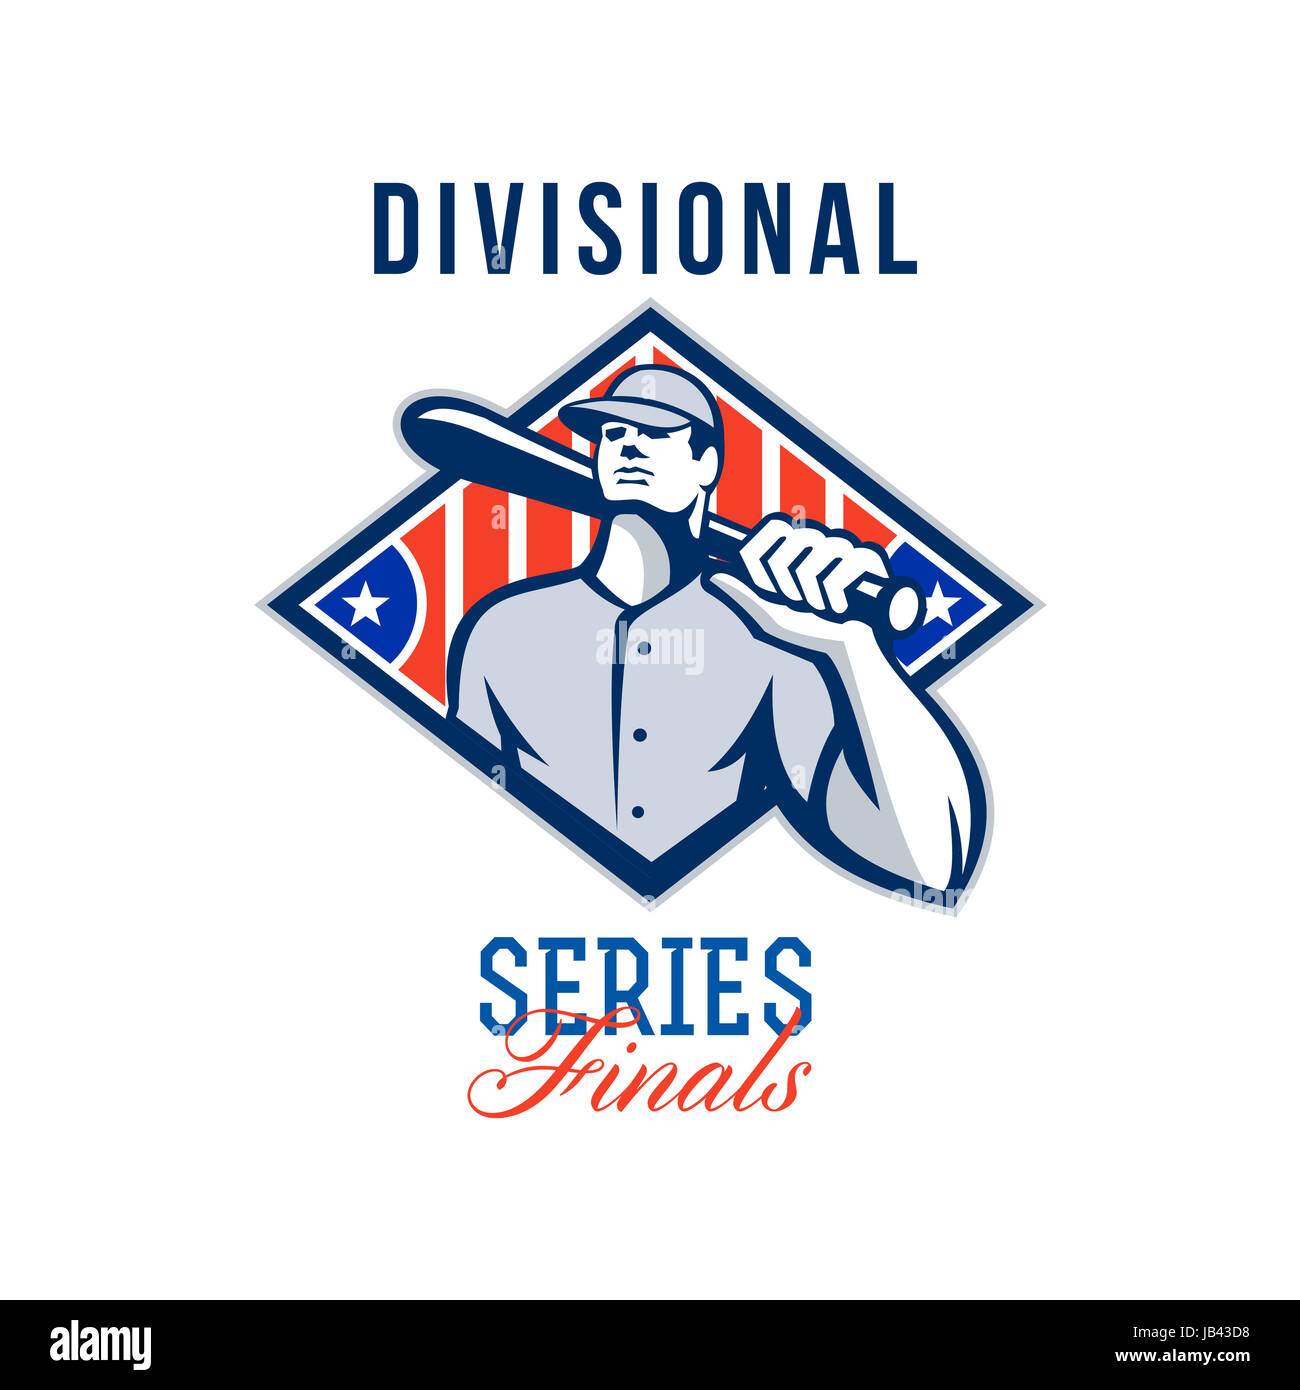 Illustration of a american baseball player batter hitter holding bat on shoulder set inside diamond shape with stars and stripes done in retro style with words Divisional Series Finals. Stock Photo